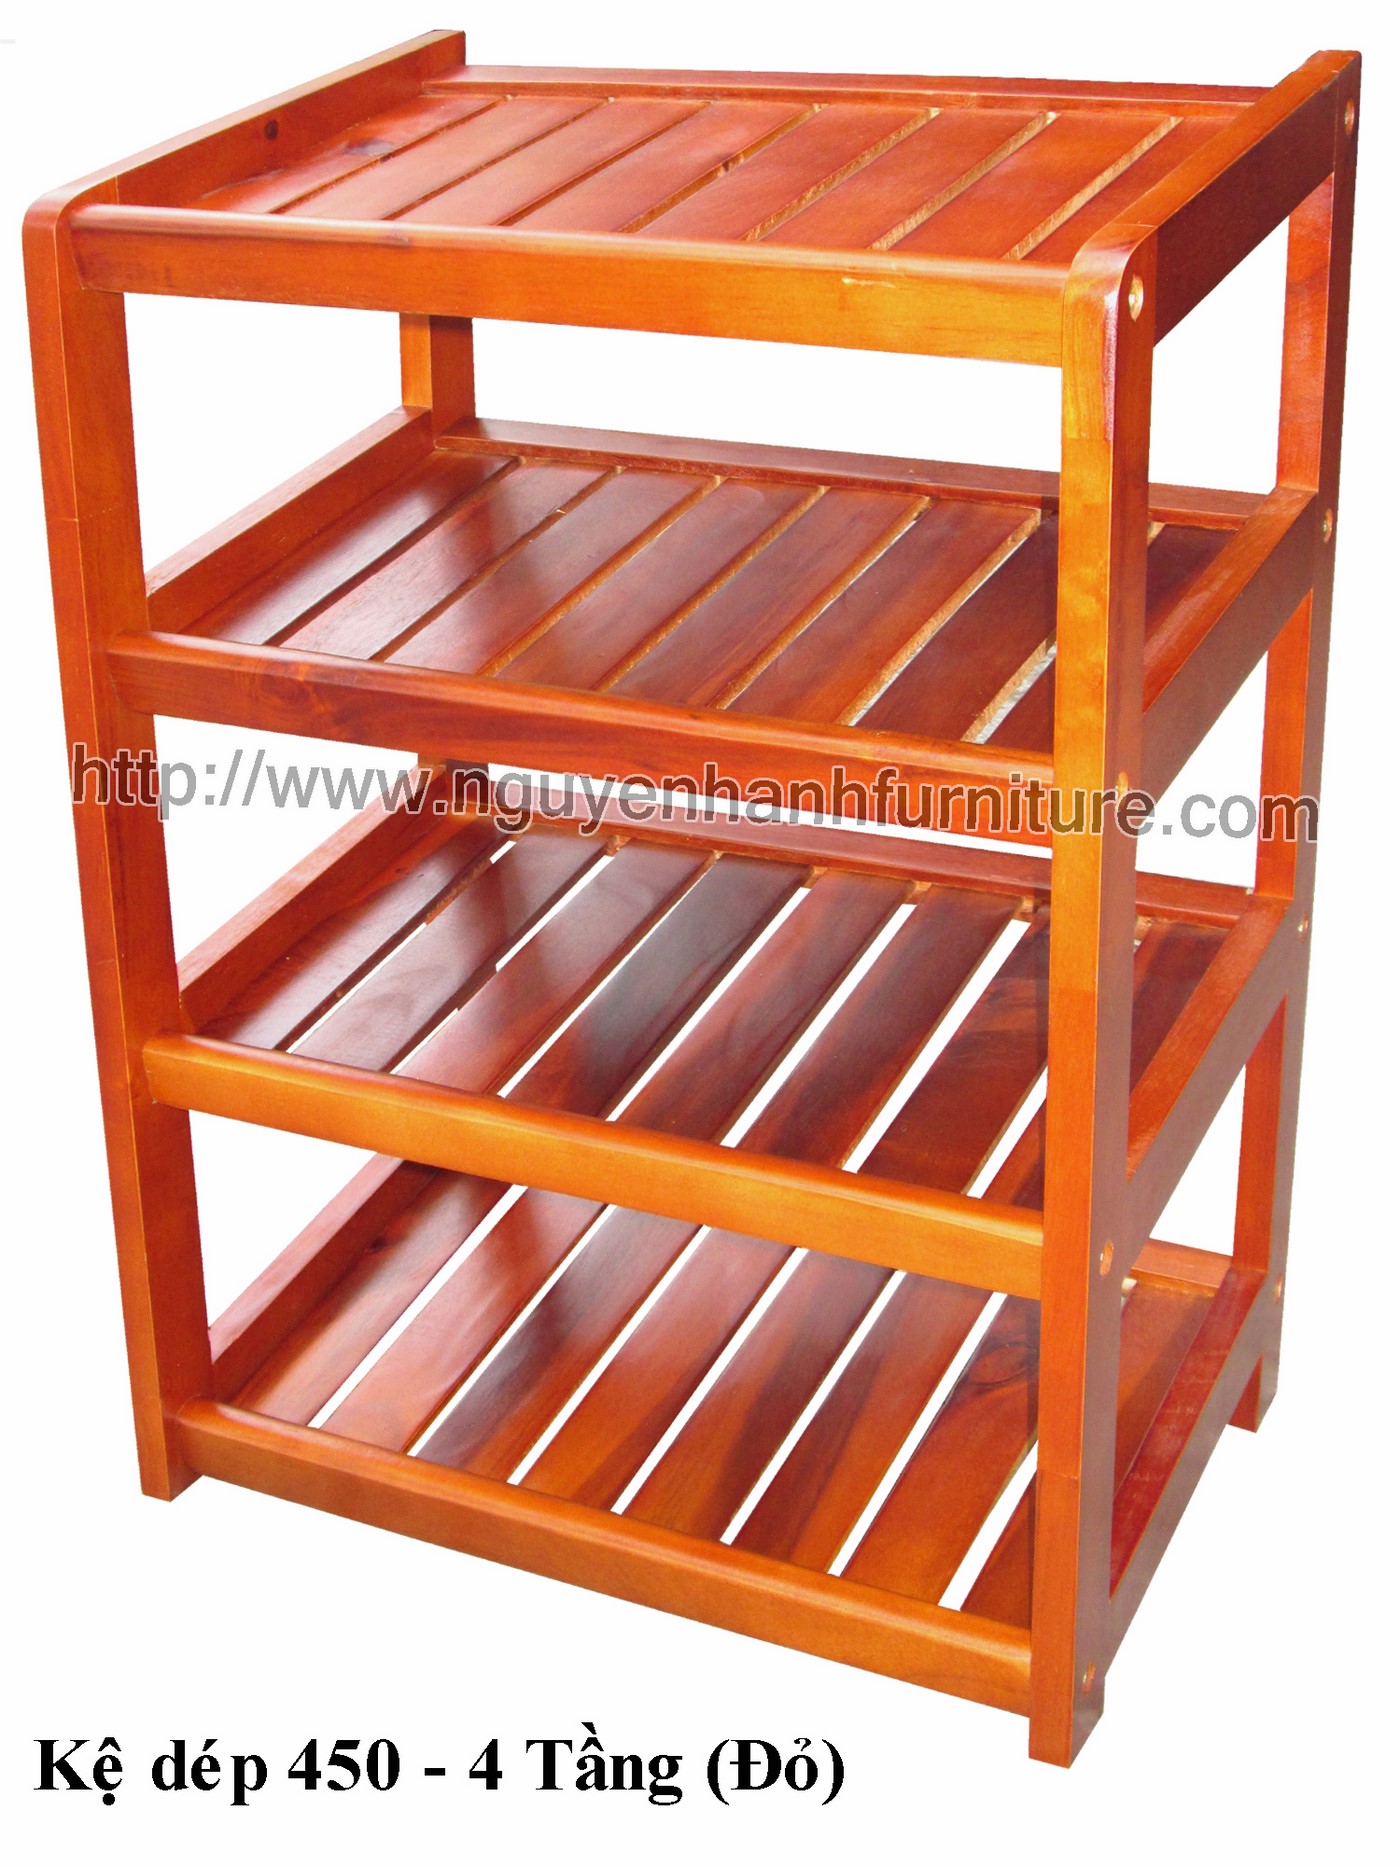 Name product: Shoeshelf 4 Floors 45 with sparse blades (Red) - Dimensions: 45 x 30 x 62 (H) - Description: Wood natural rubber